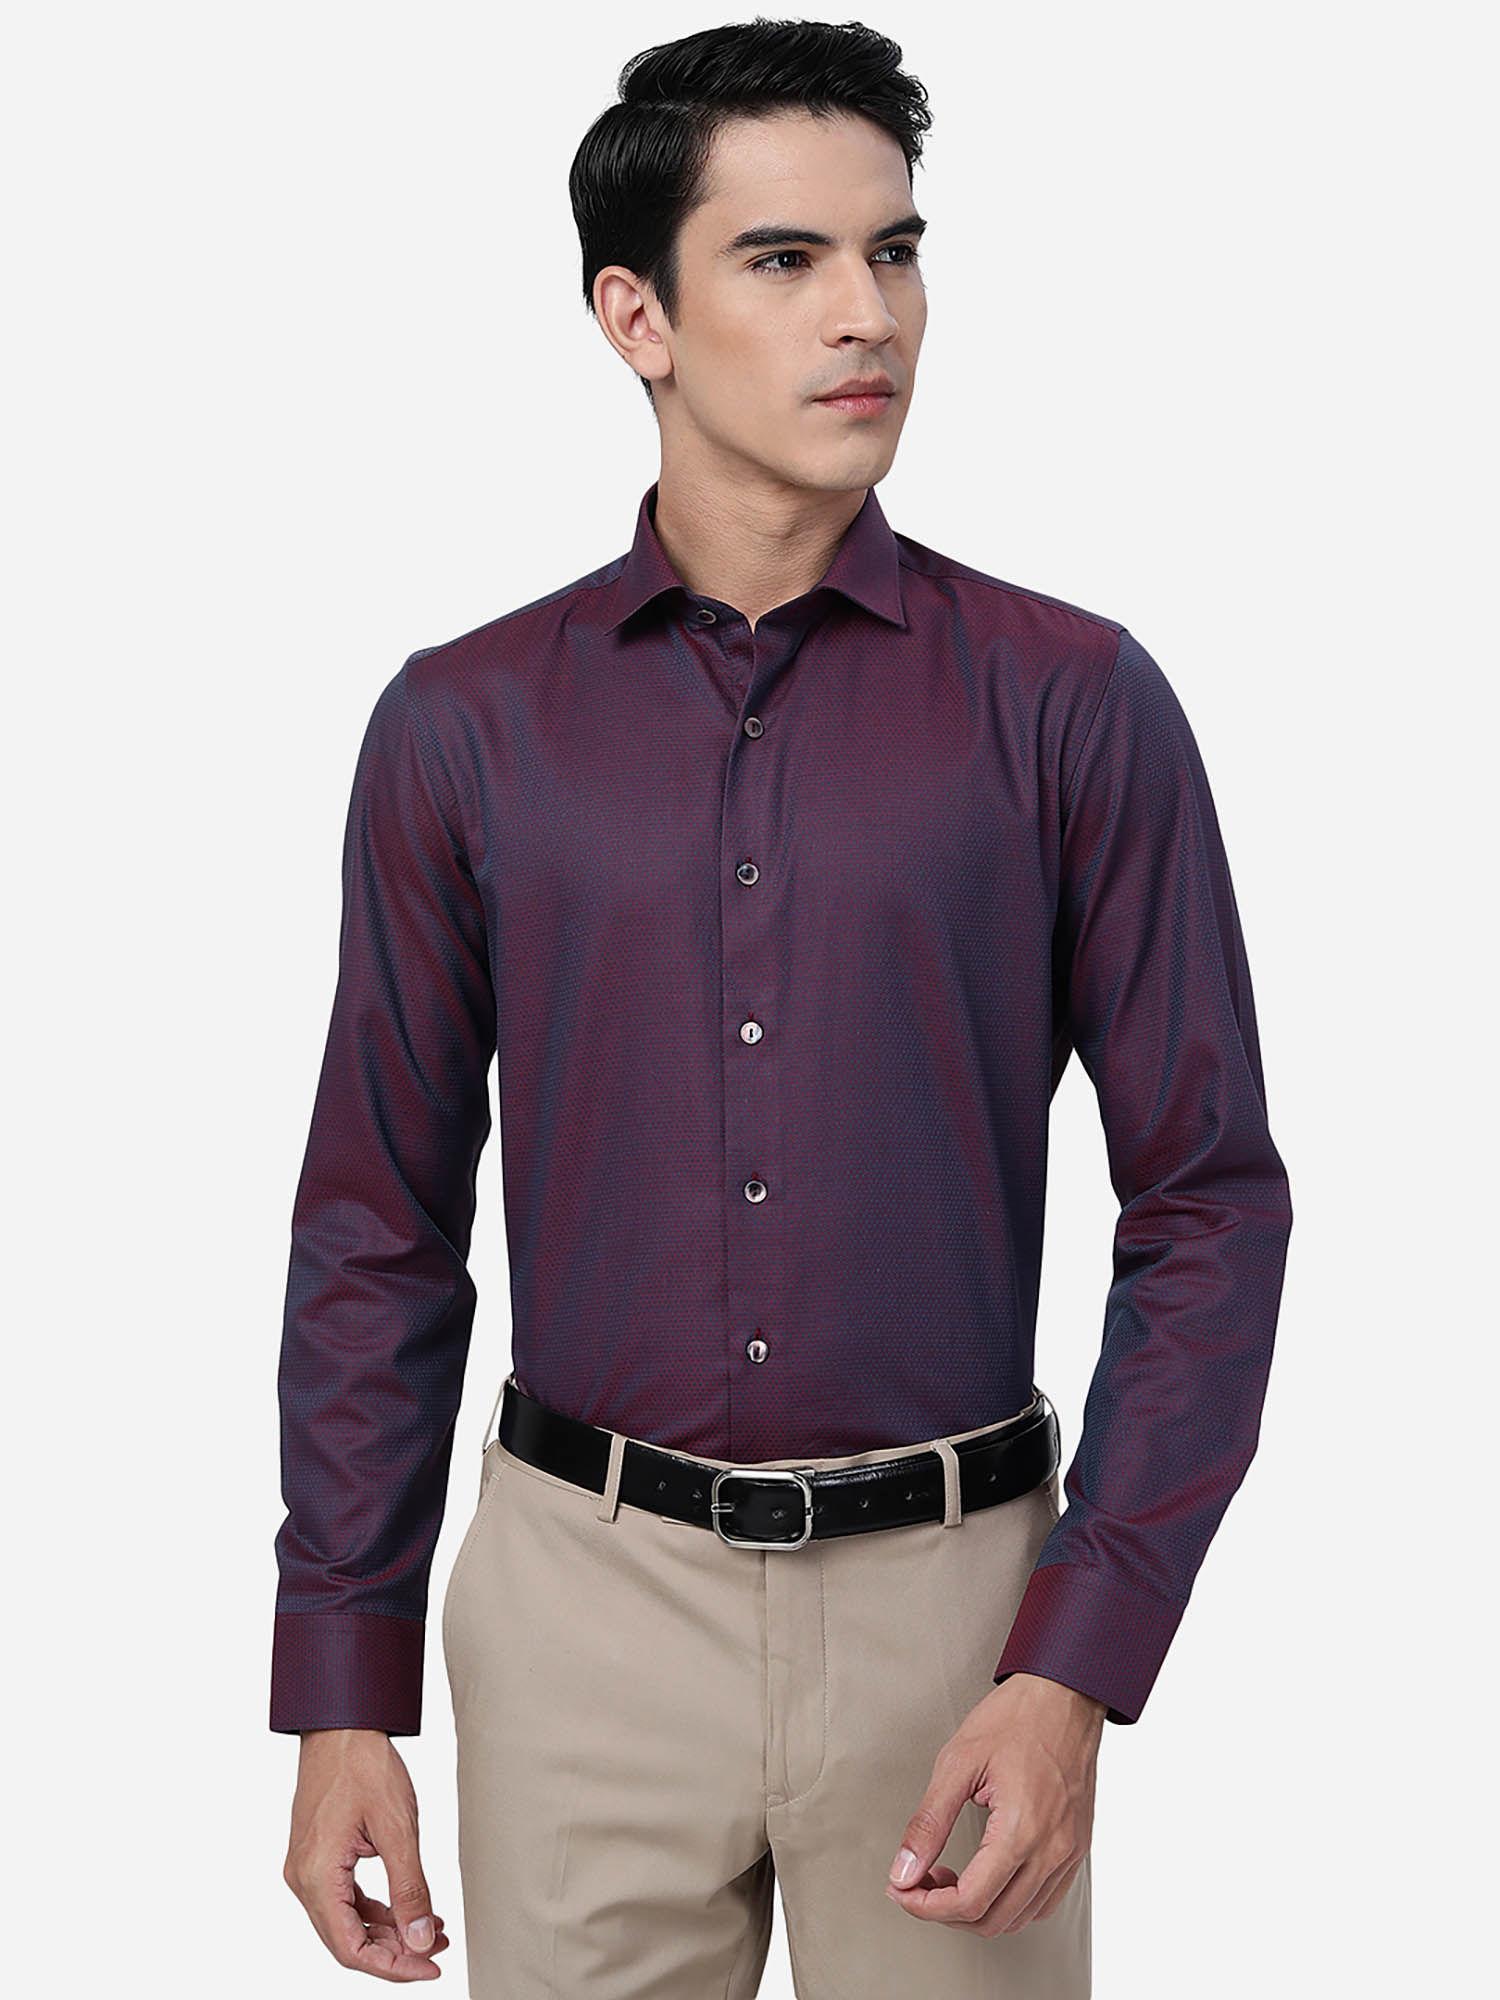 mens maroon 100% cotton slim fit solid formal party wear shirt